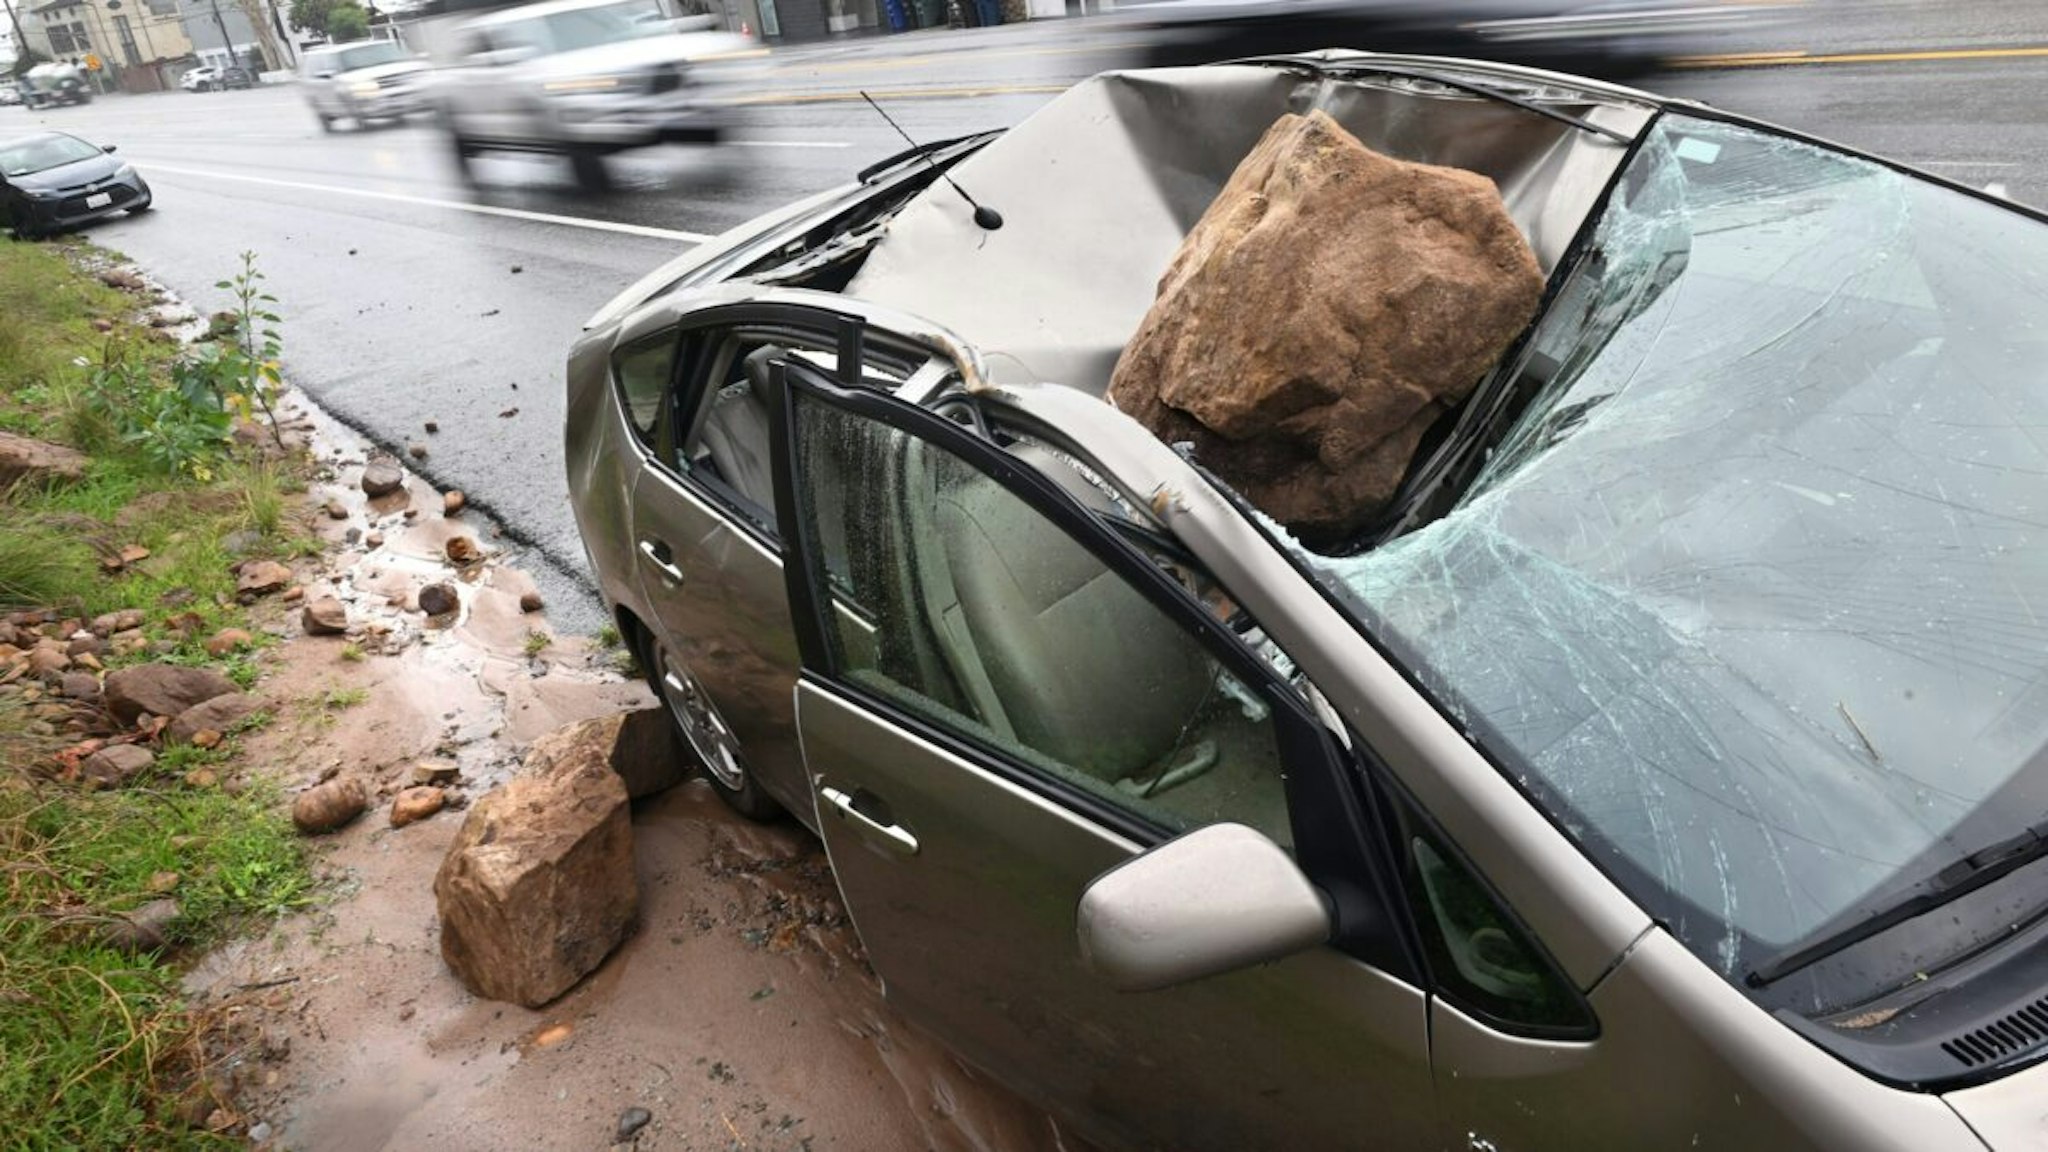 Malibu California January 10, 2023-A boulder crashed on top of a parked car along P.C.H. in Malibu Tuesday after a storm passed through.